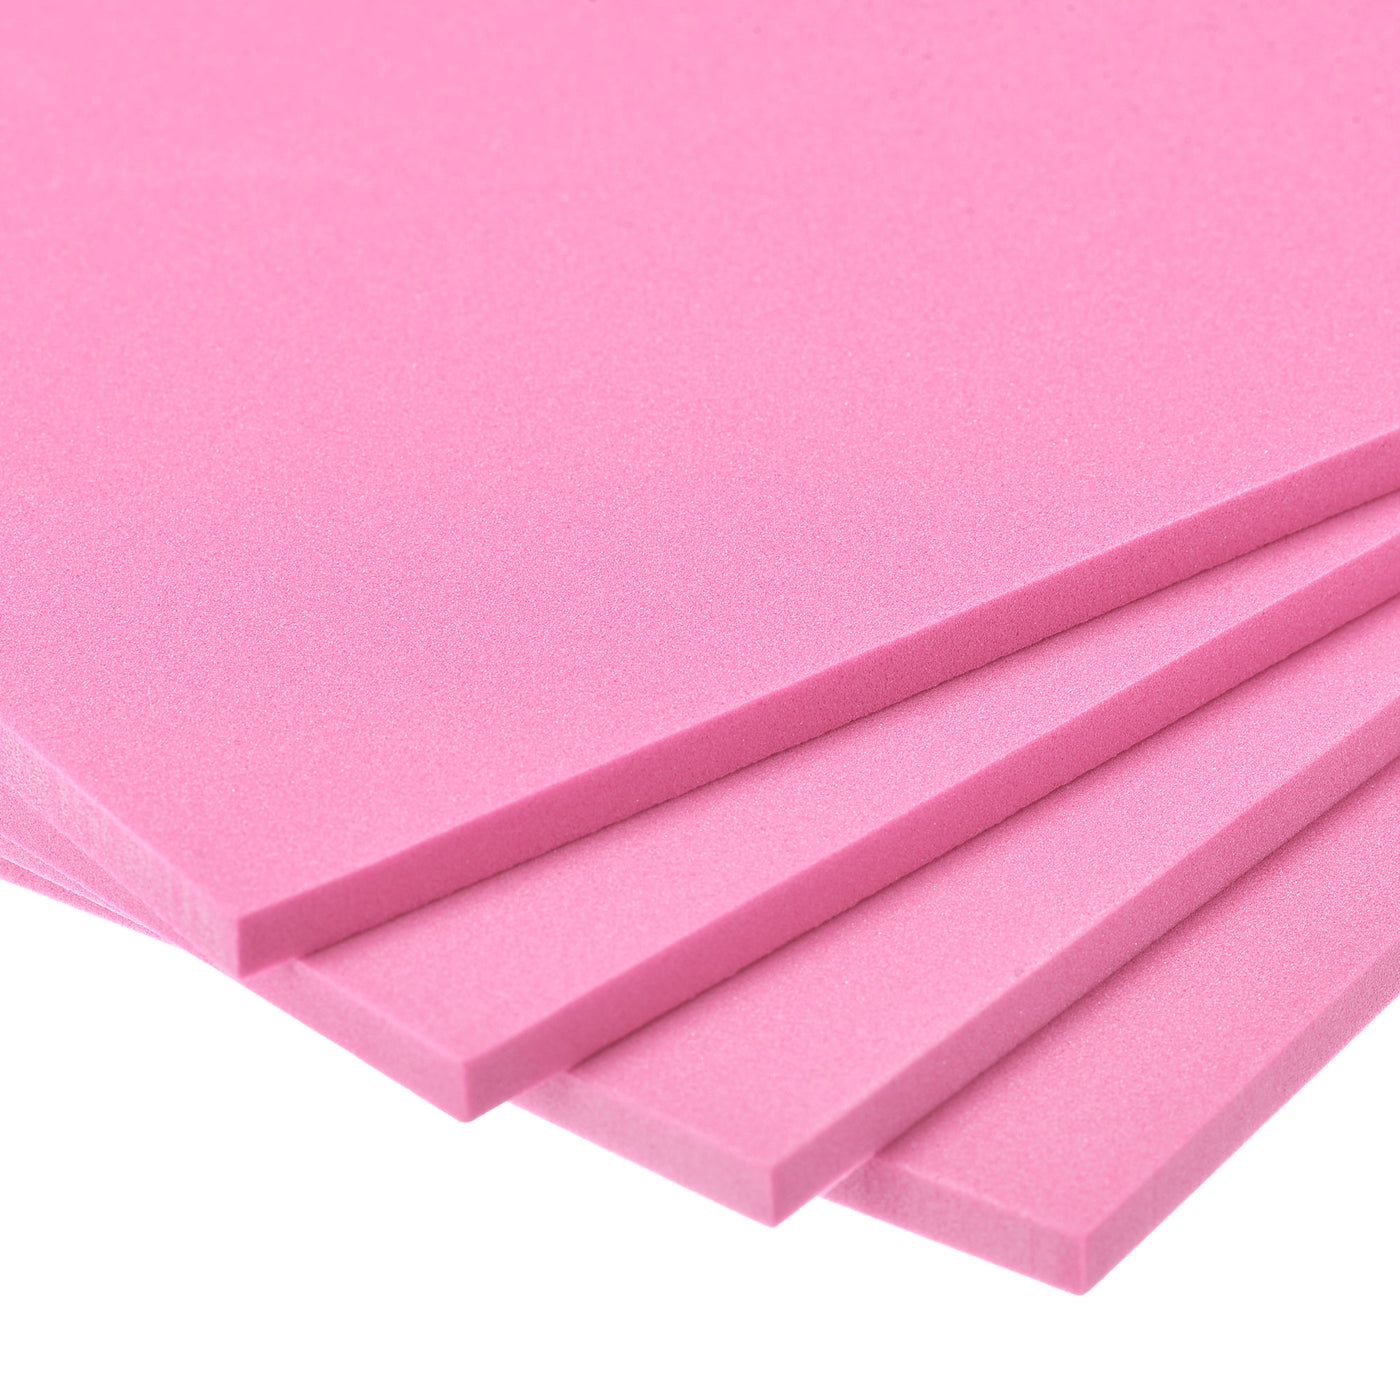 Uxcell Uxcell Purple EVA Foam Sheets 10 x 10 Inch 5mm Thickness for Crafts DIY Projects, 4 Pcs